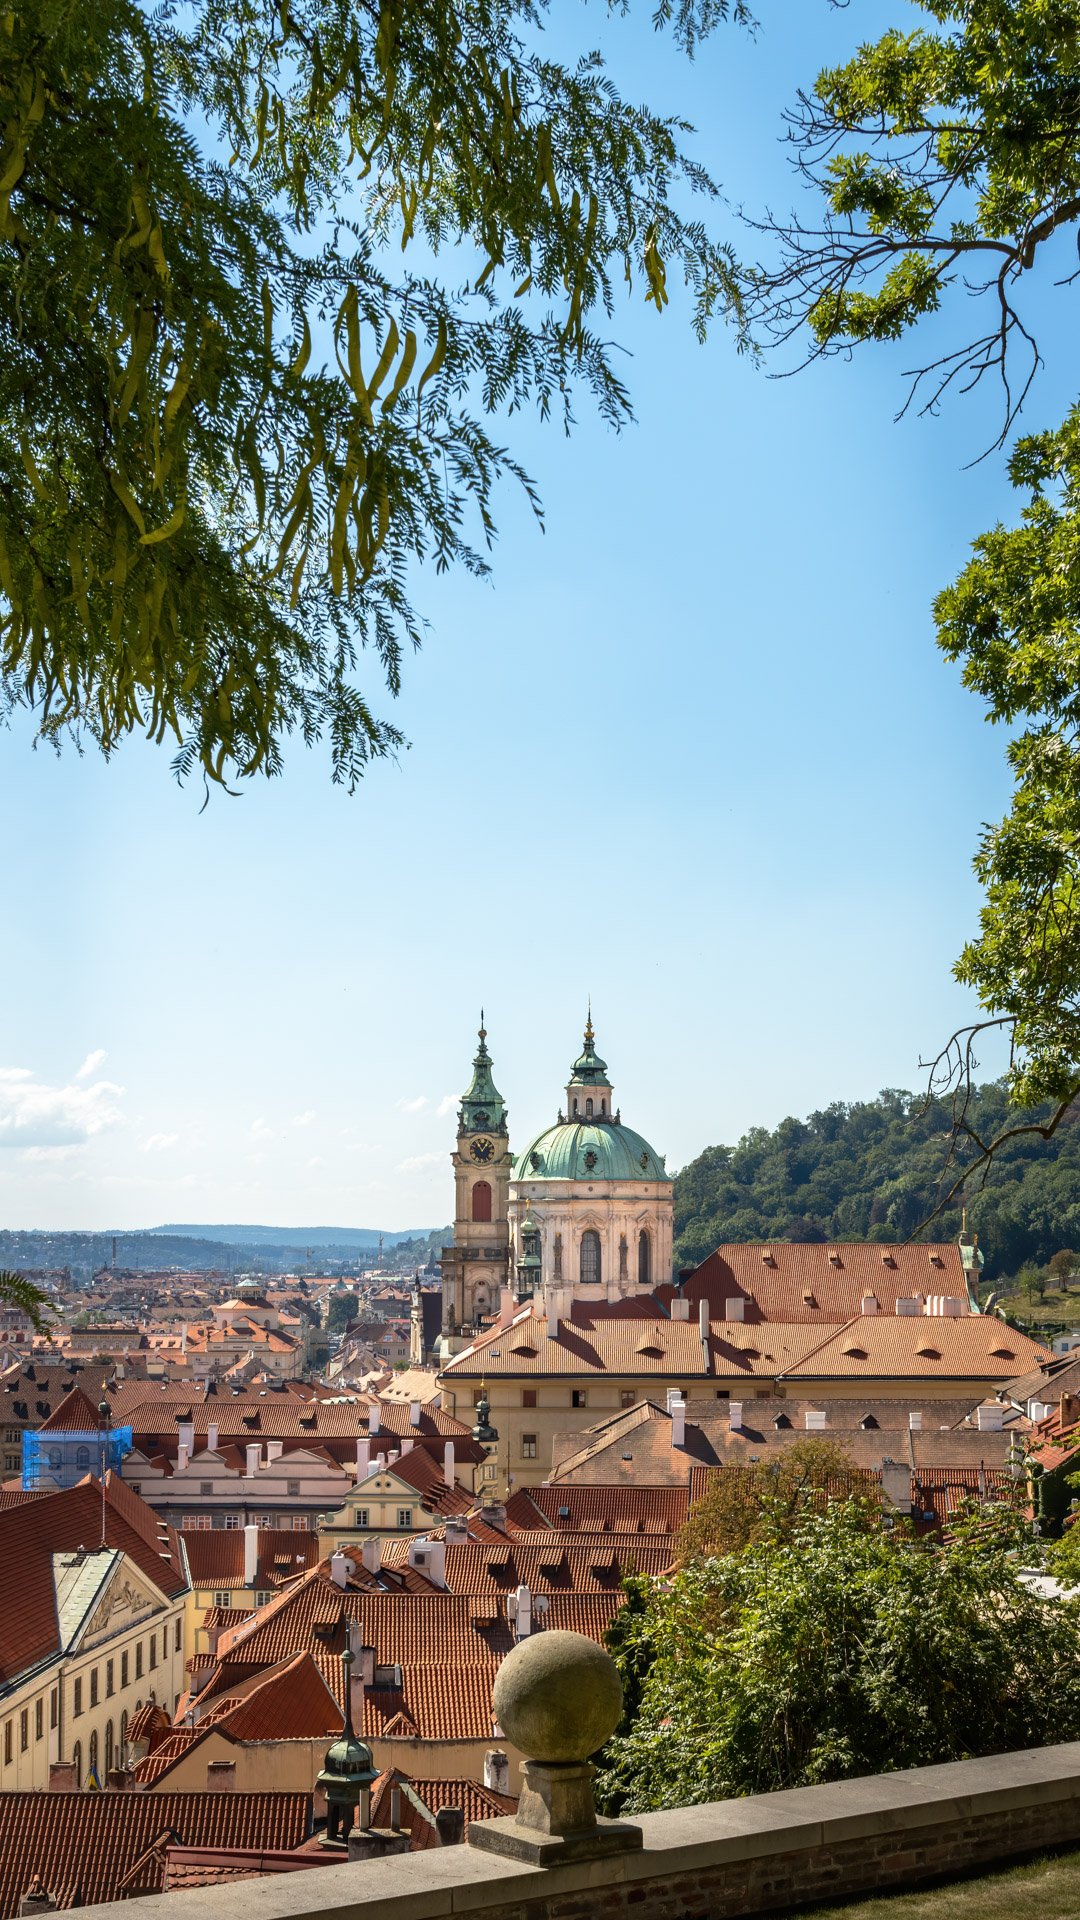 Discover the stunning beauty of Prague with this high-quality cityscape background in HD resolution. This wallpaper captures the iconic architecture and charm of the Czech Republic's capital city.